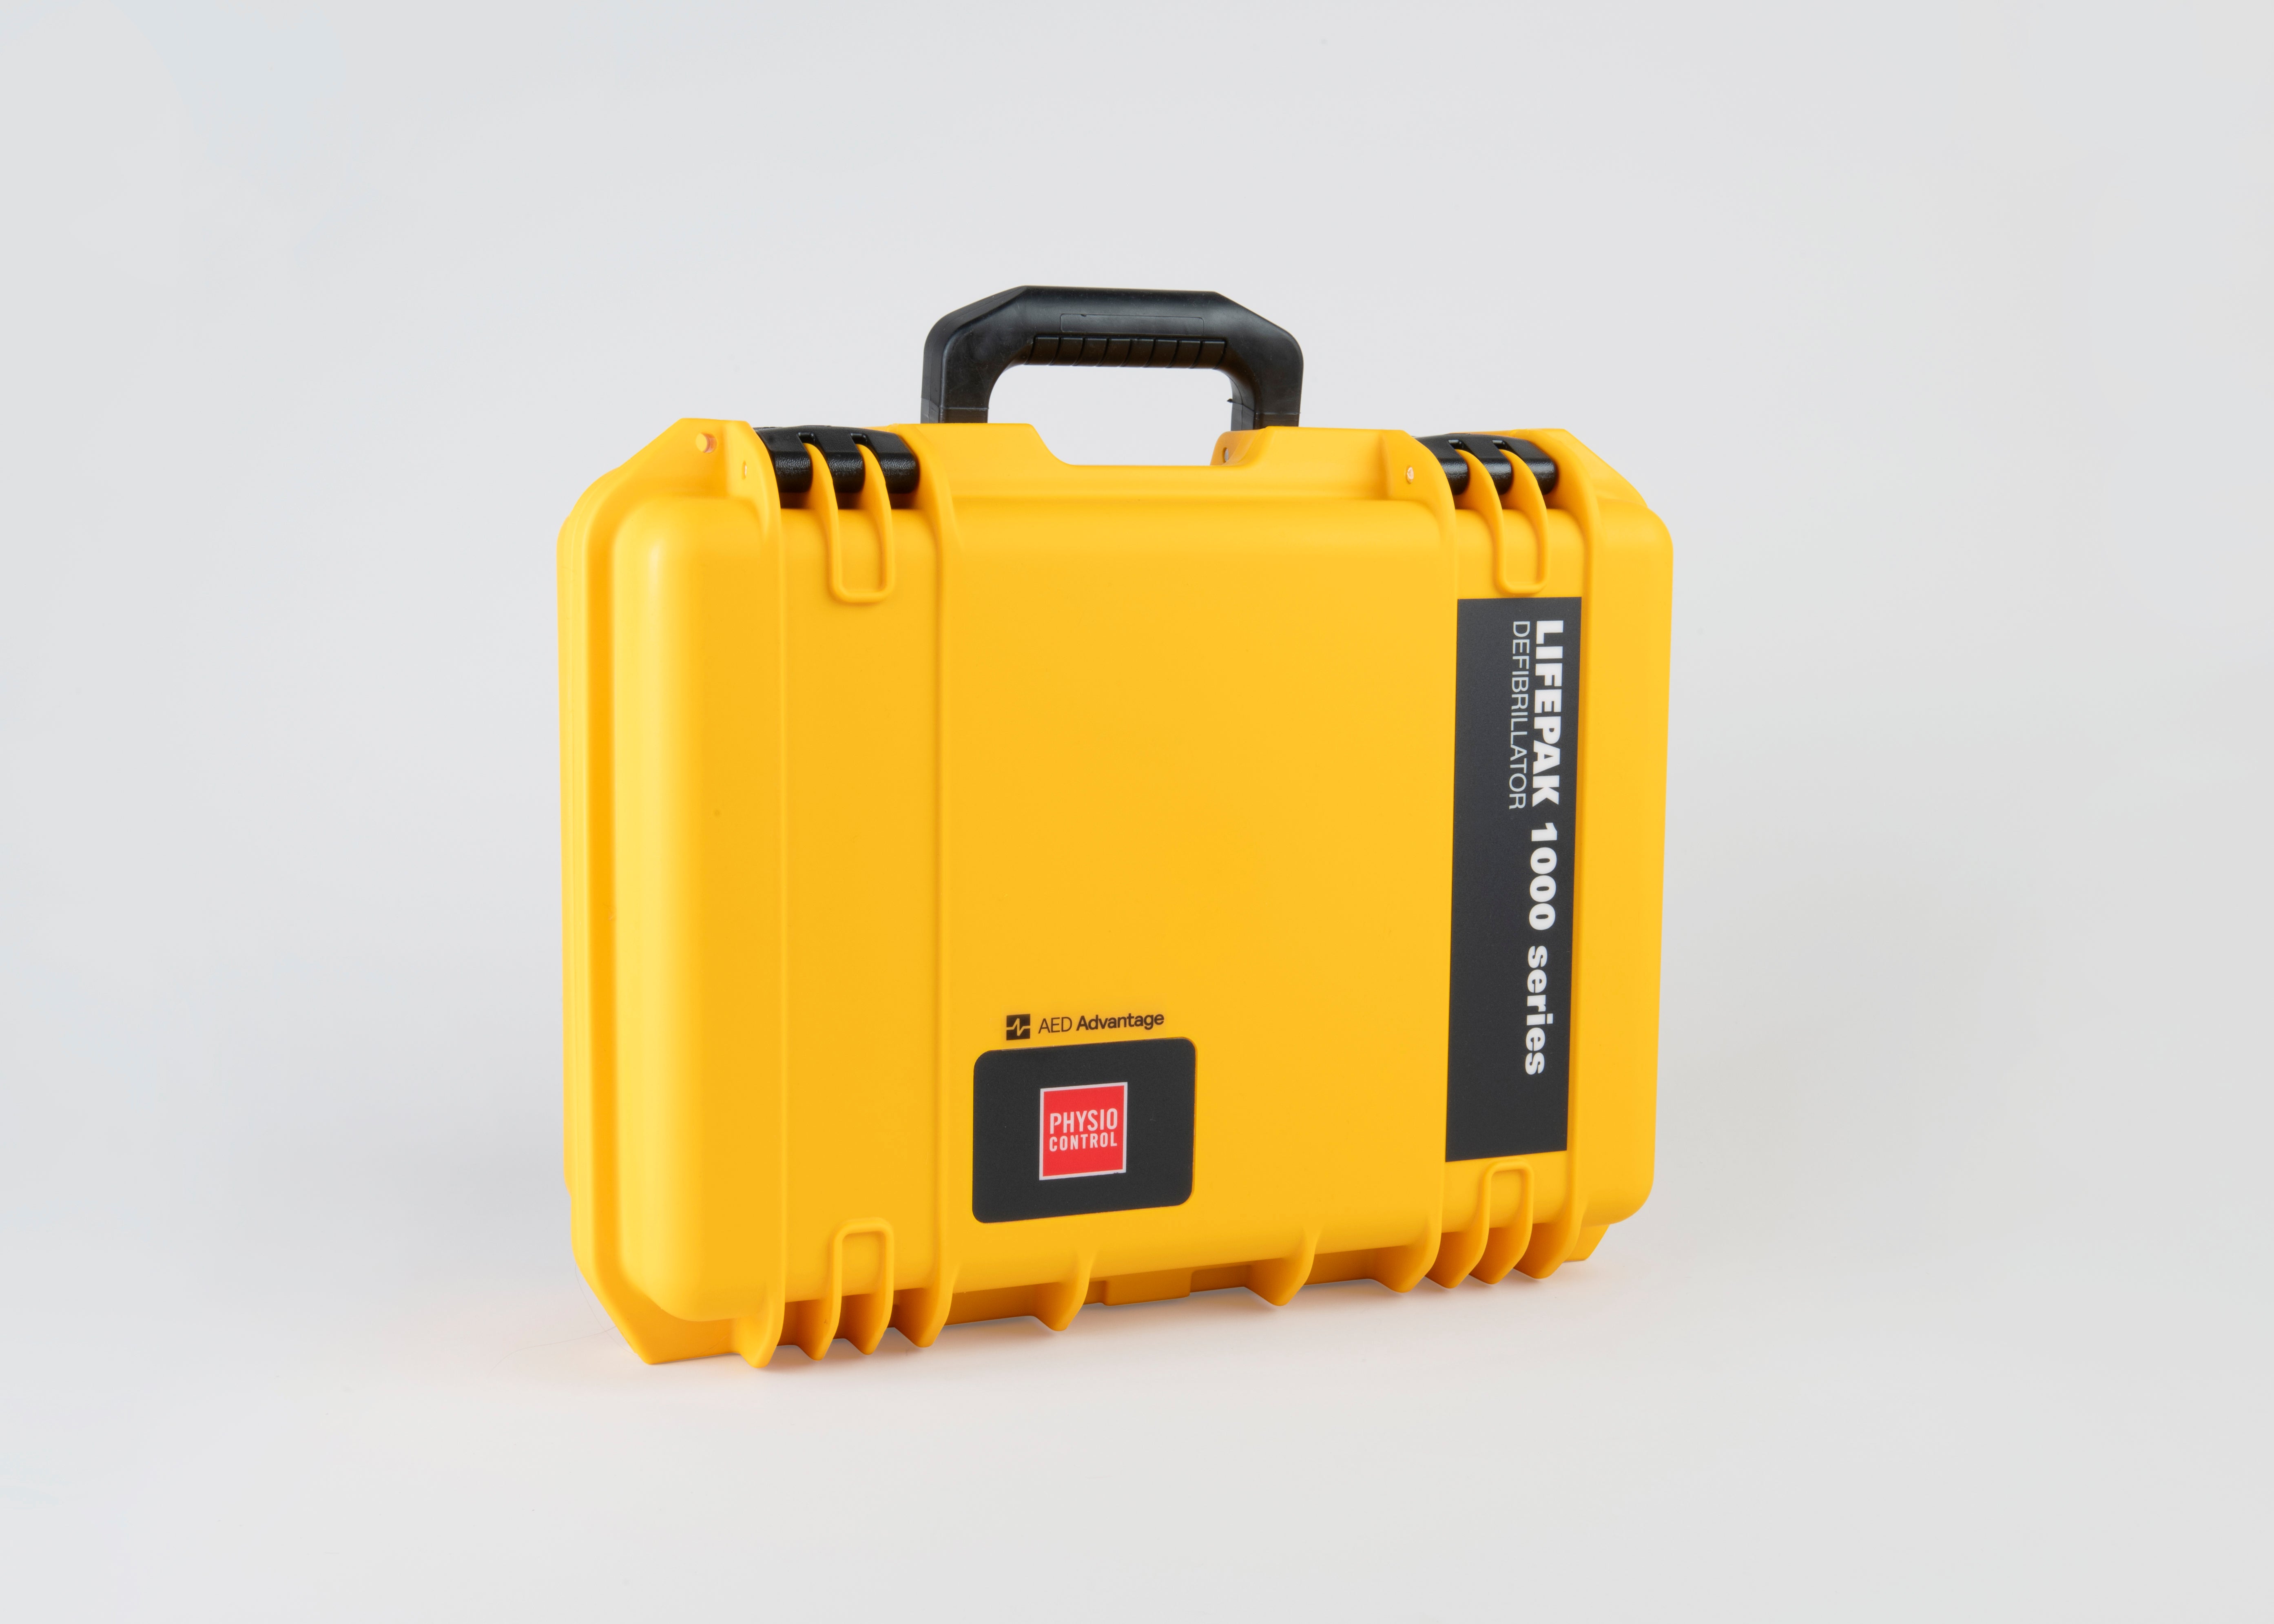 A bright yellow hard carrying case with a black handle meant to securely store and move a LIFEPAK 1000 defibrillator